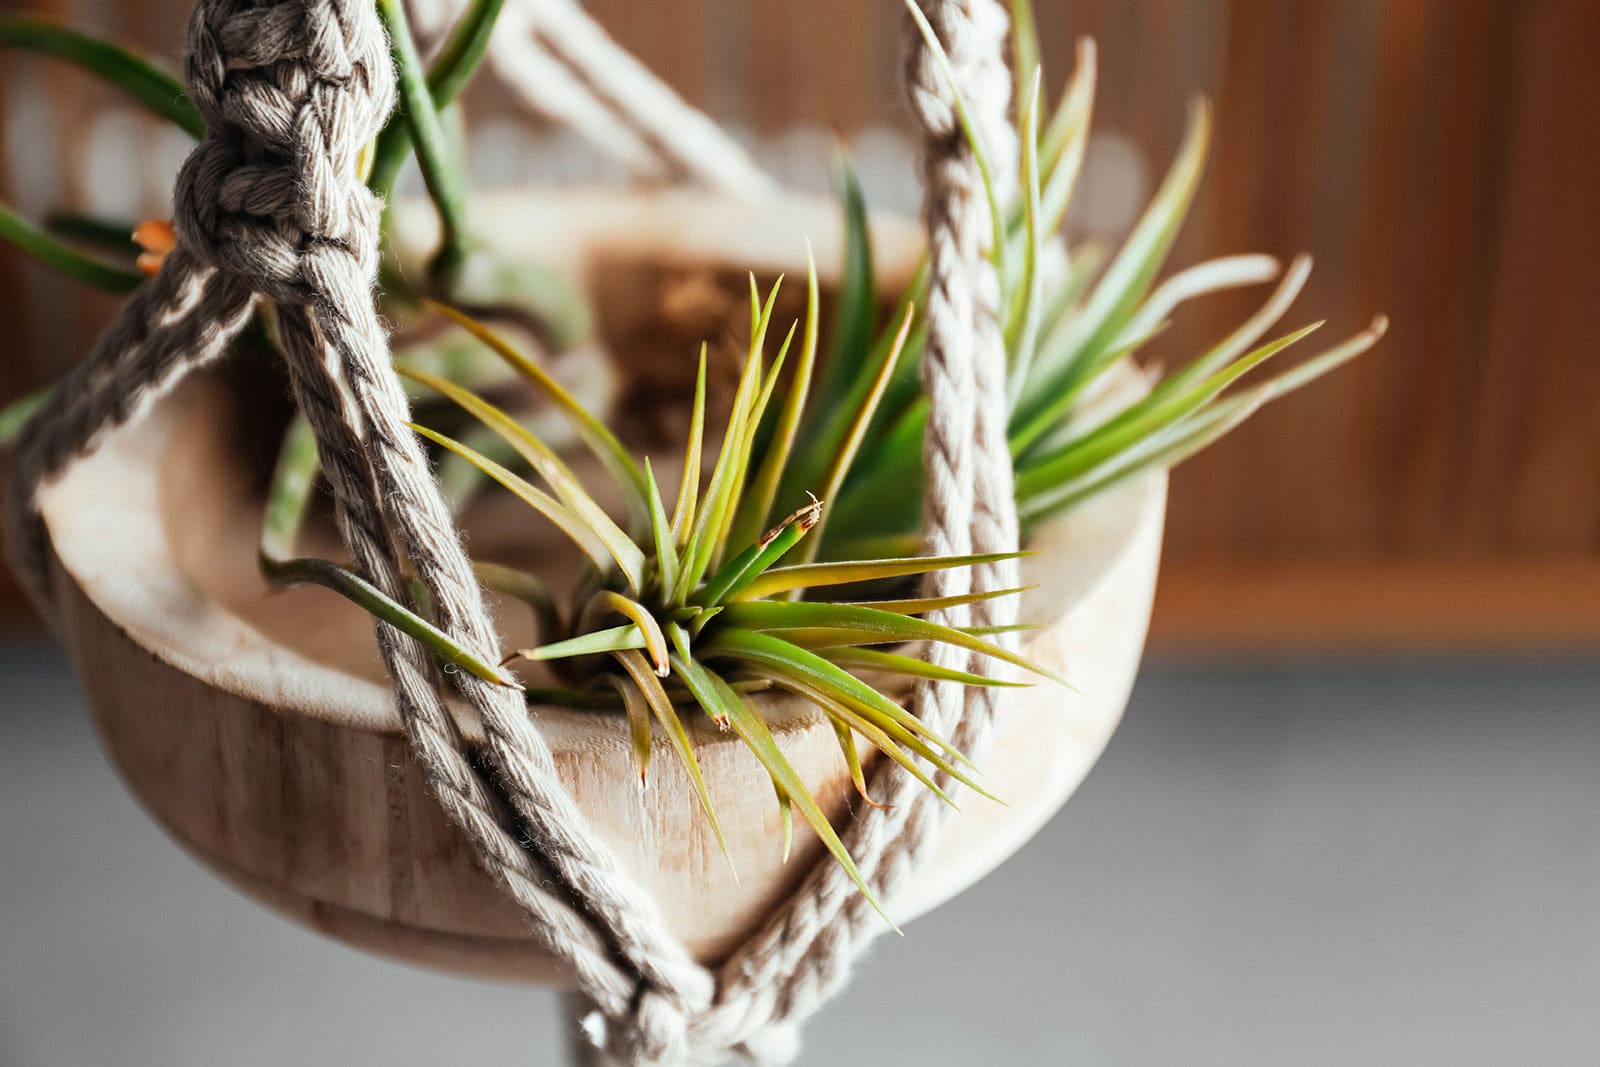 Air plants displayed in a wooden bowl plant holder suspended with jute rope